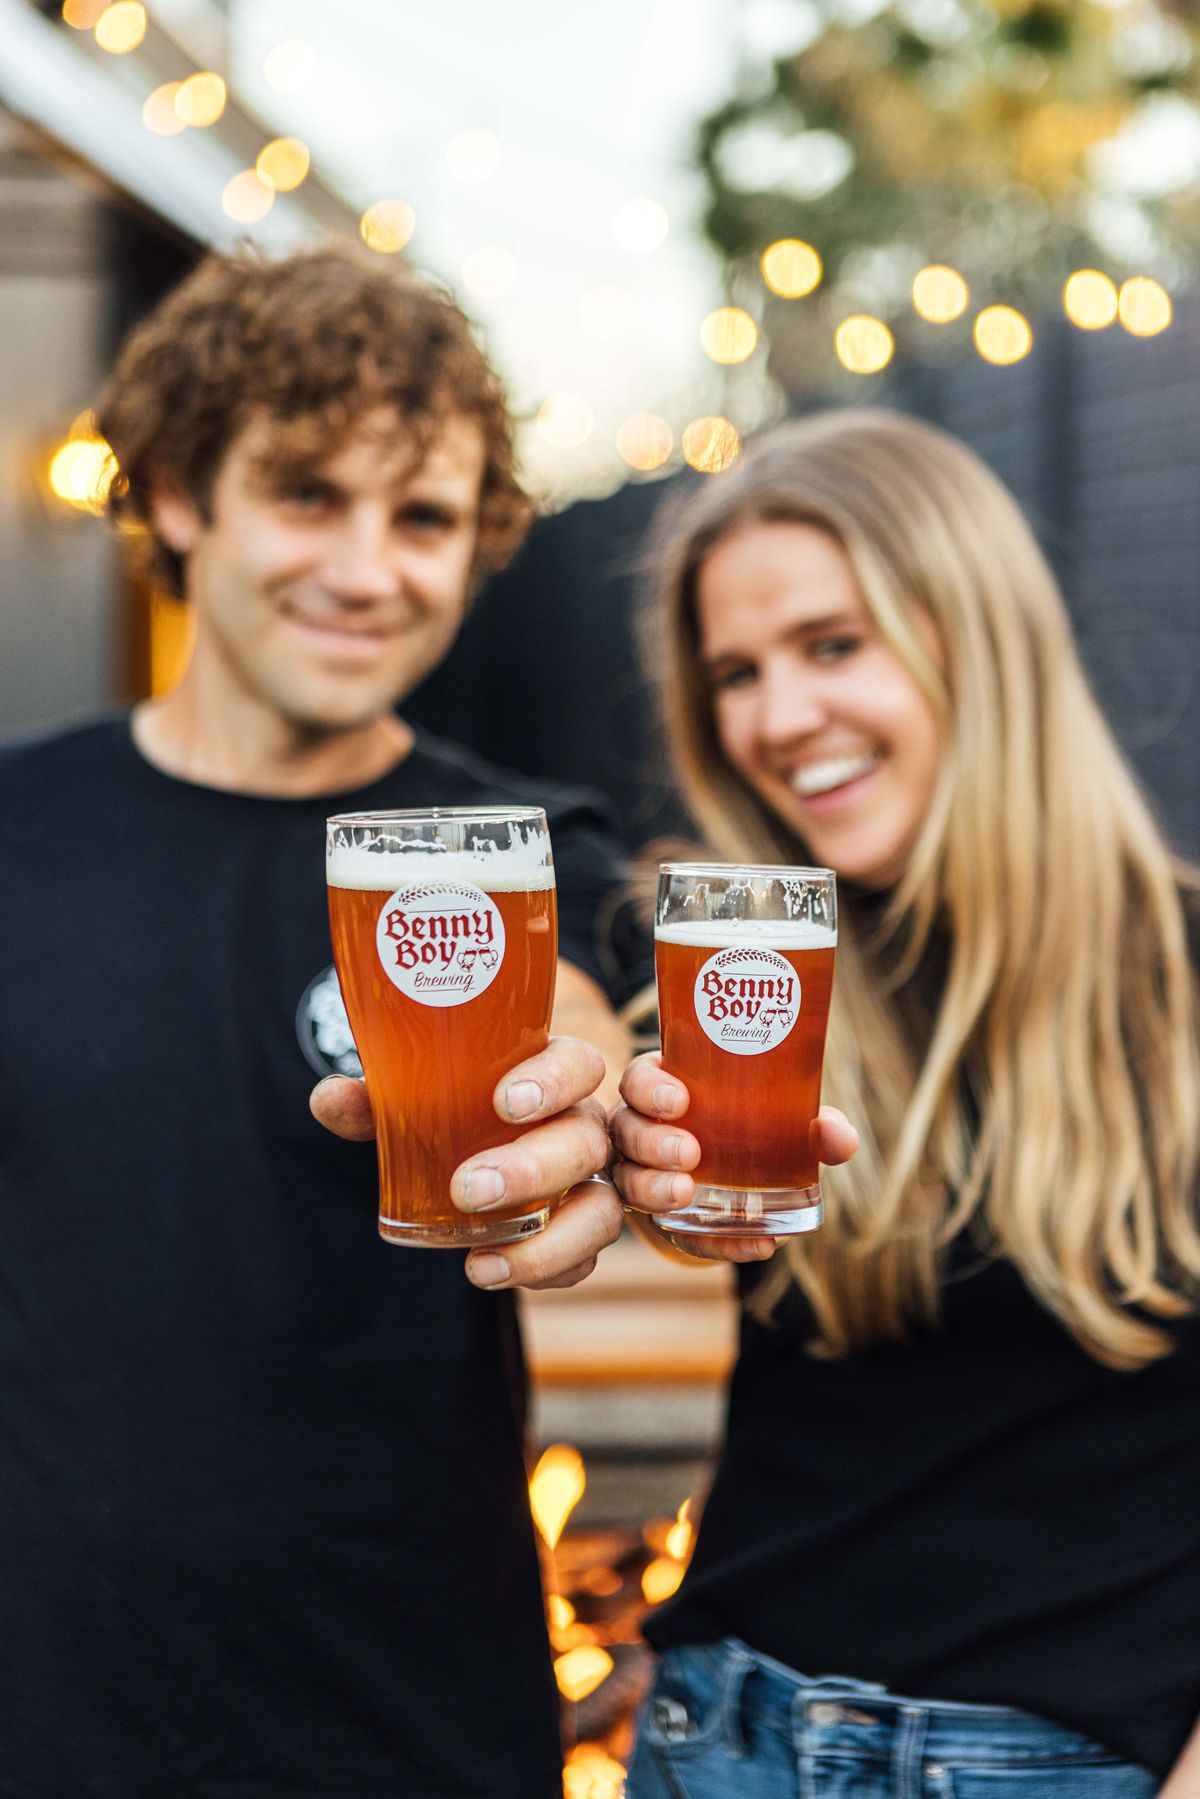 Ben Farber and Chelsey Rosetter, the founders of Benny Boy Brewing.